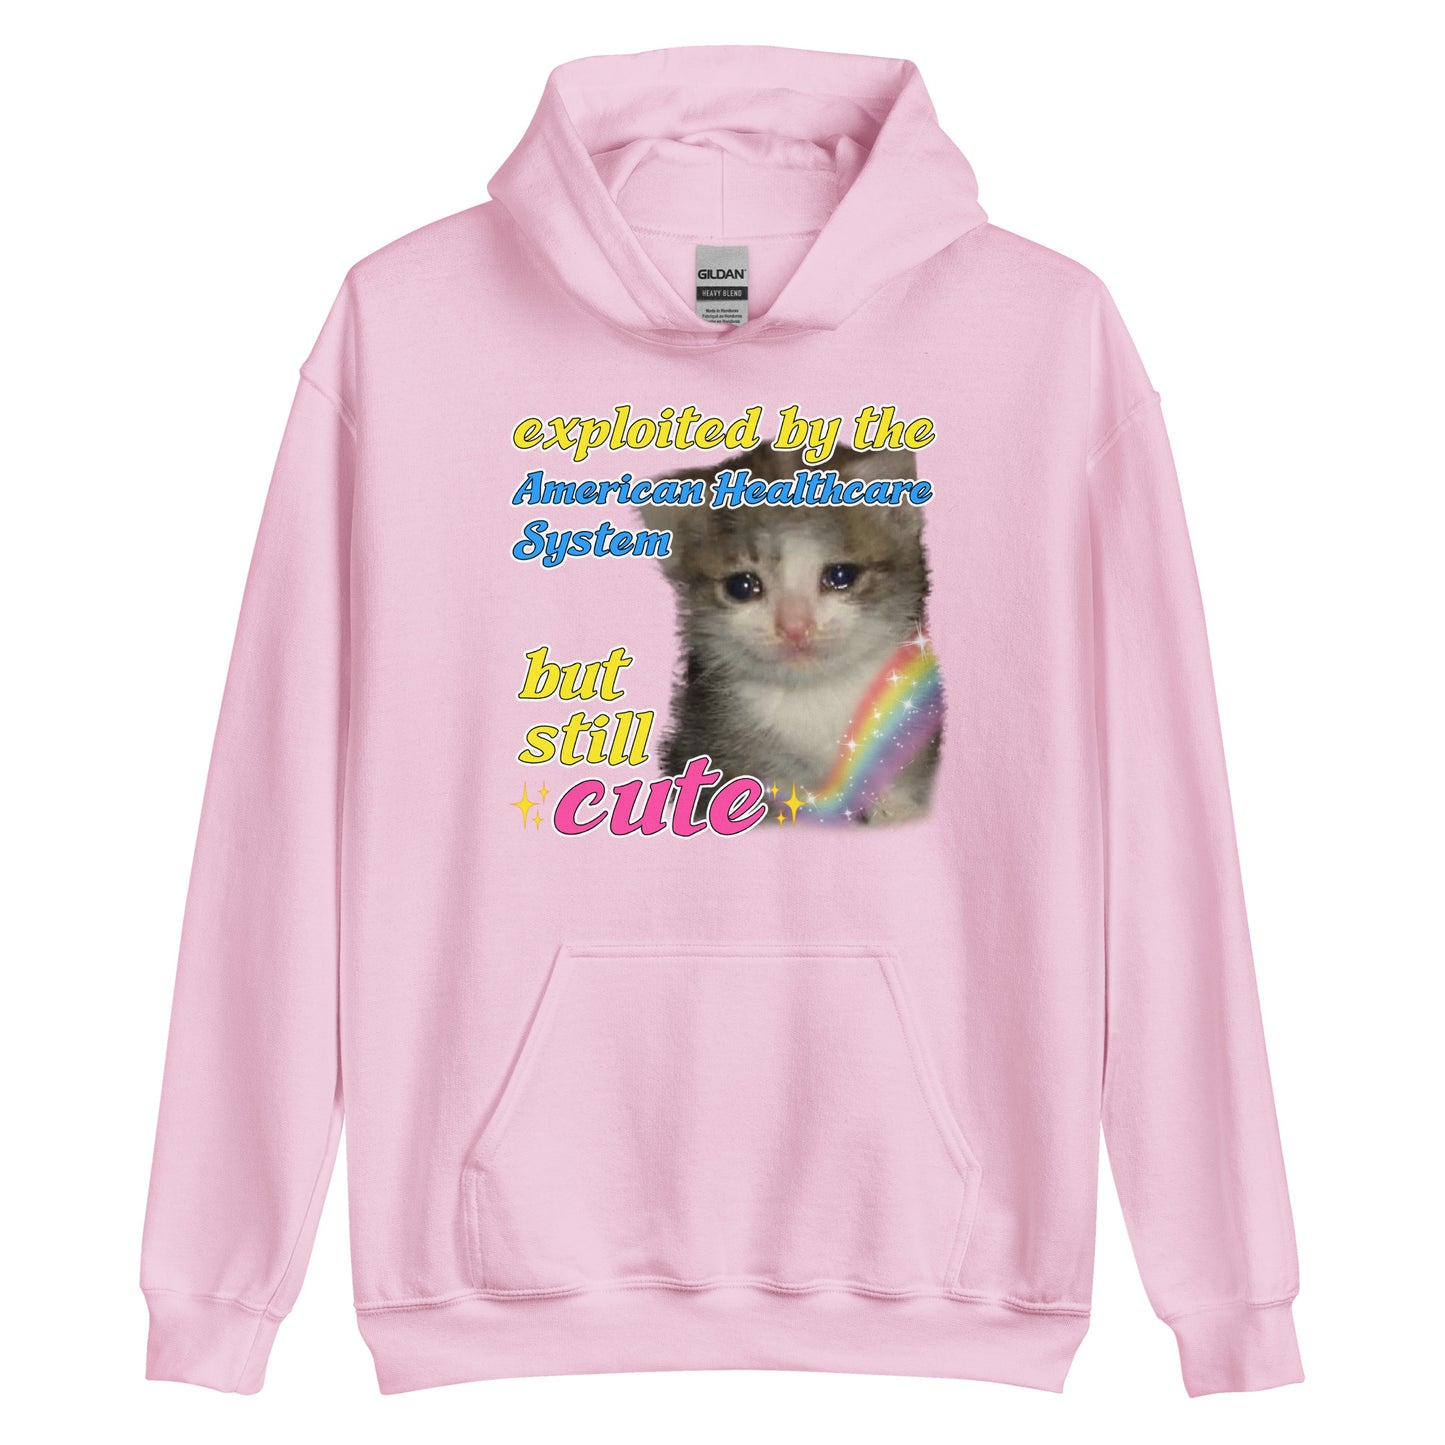 Exploited by the American Healthcare System Cat Hoodie